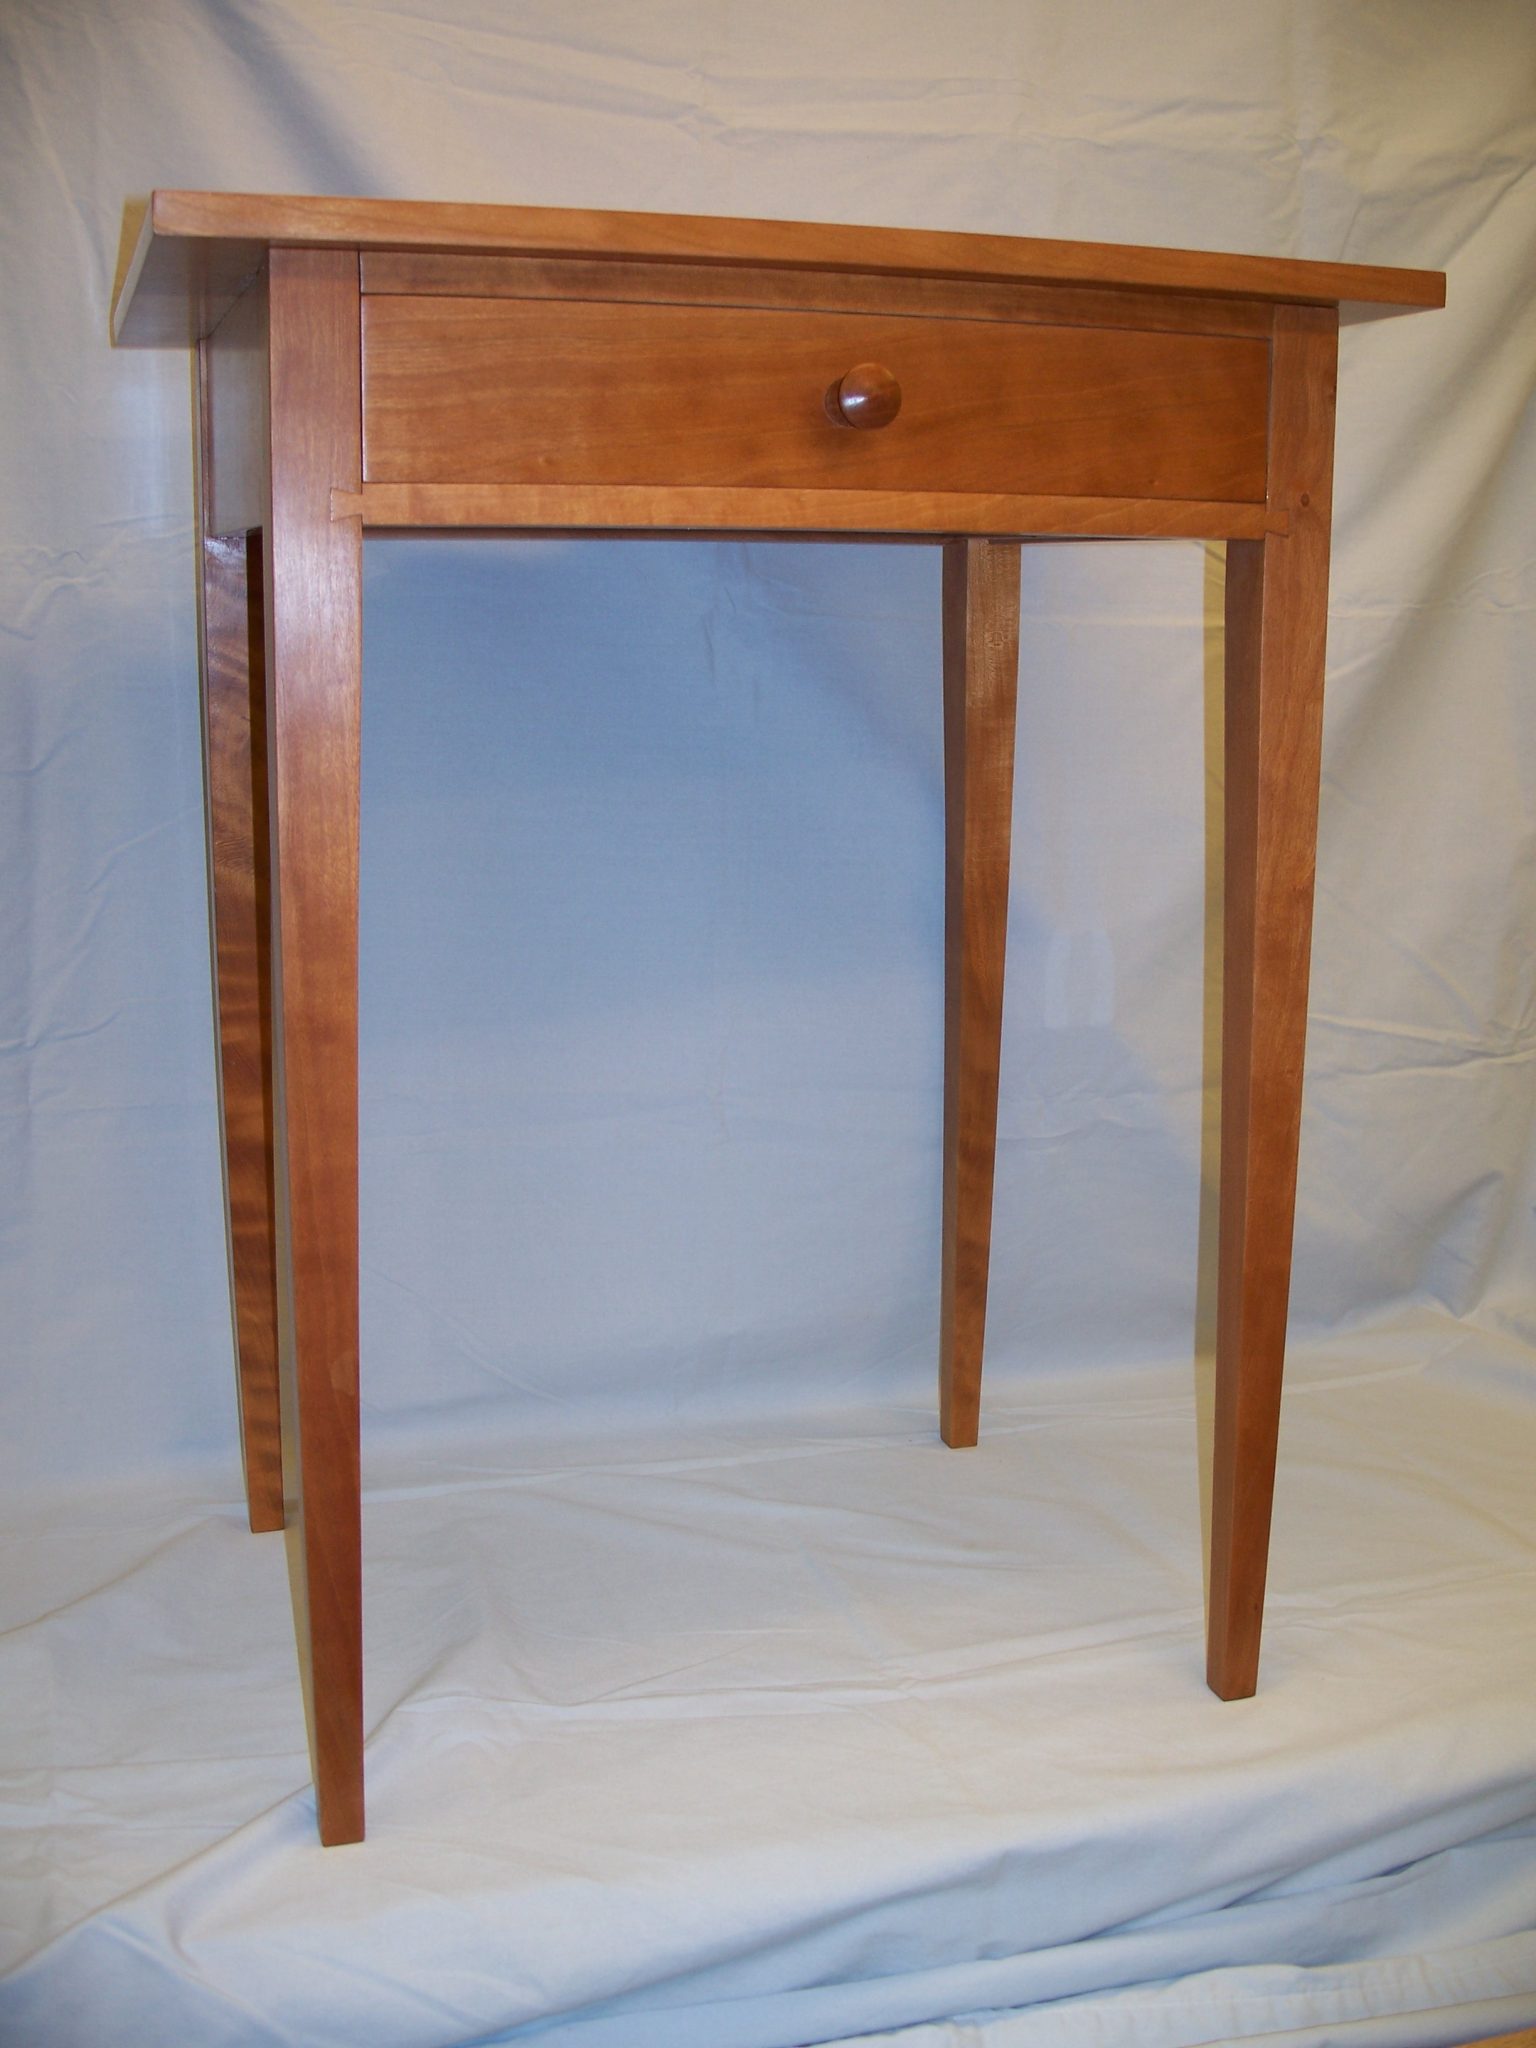 Shaker style Cherry Night Table from plans in Fine Woodworking